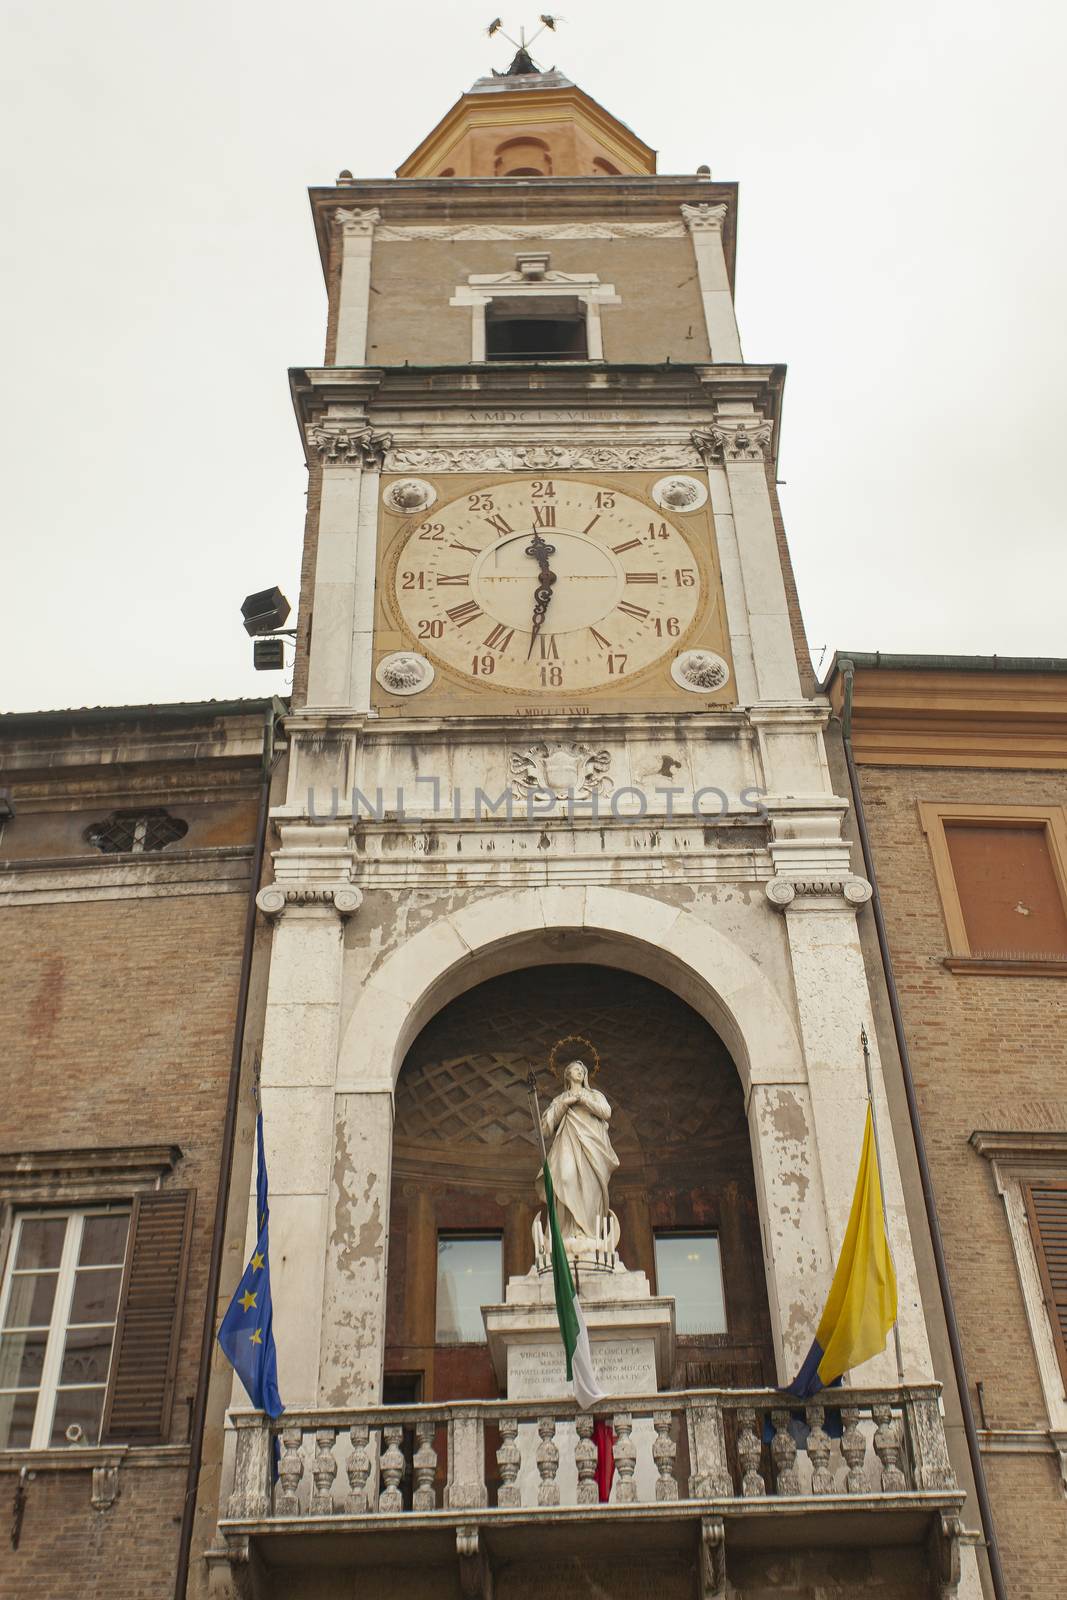 Palazzo comunale in Modena, Italy in english Town Hall building